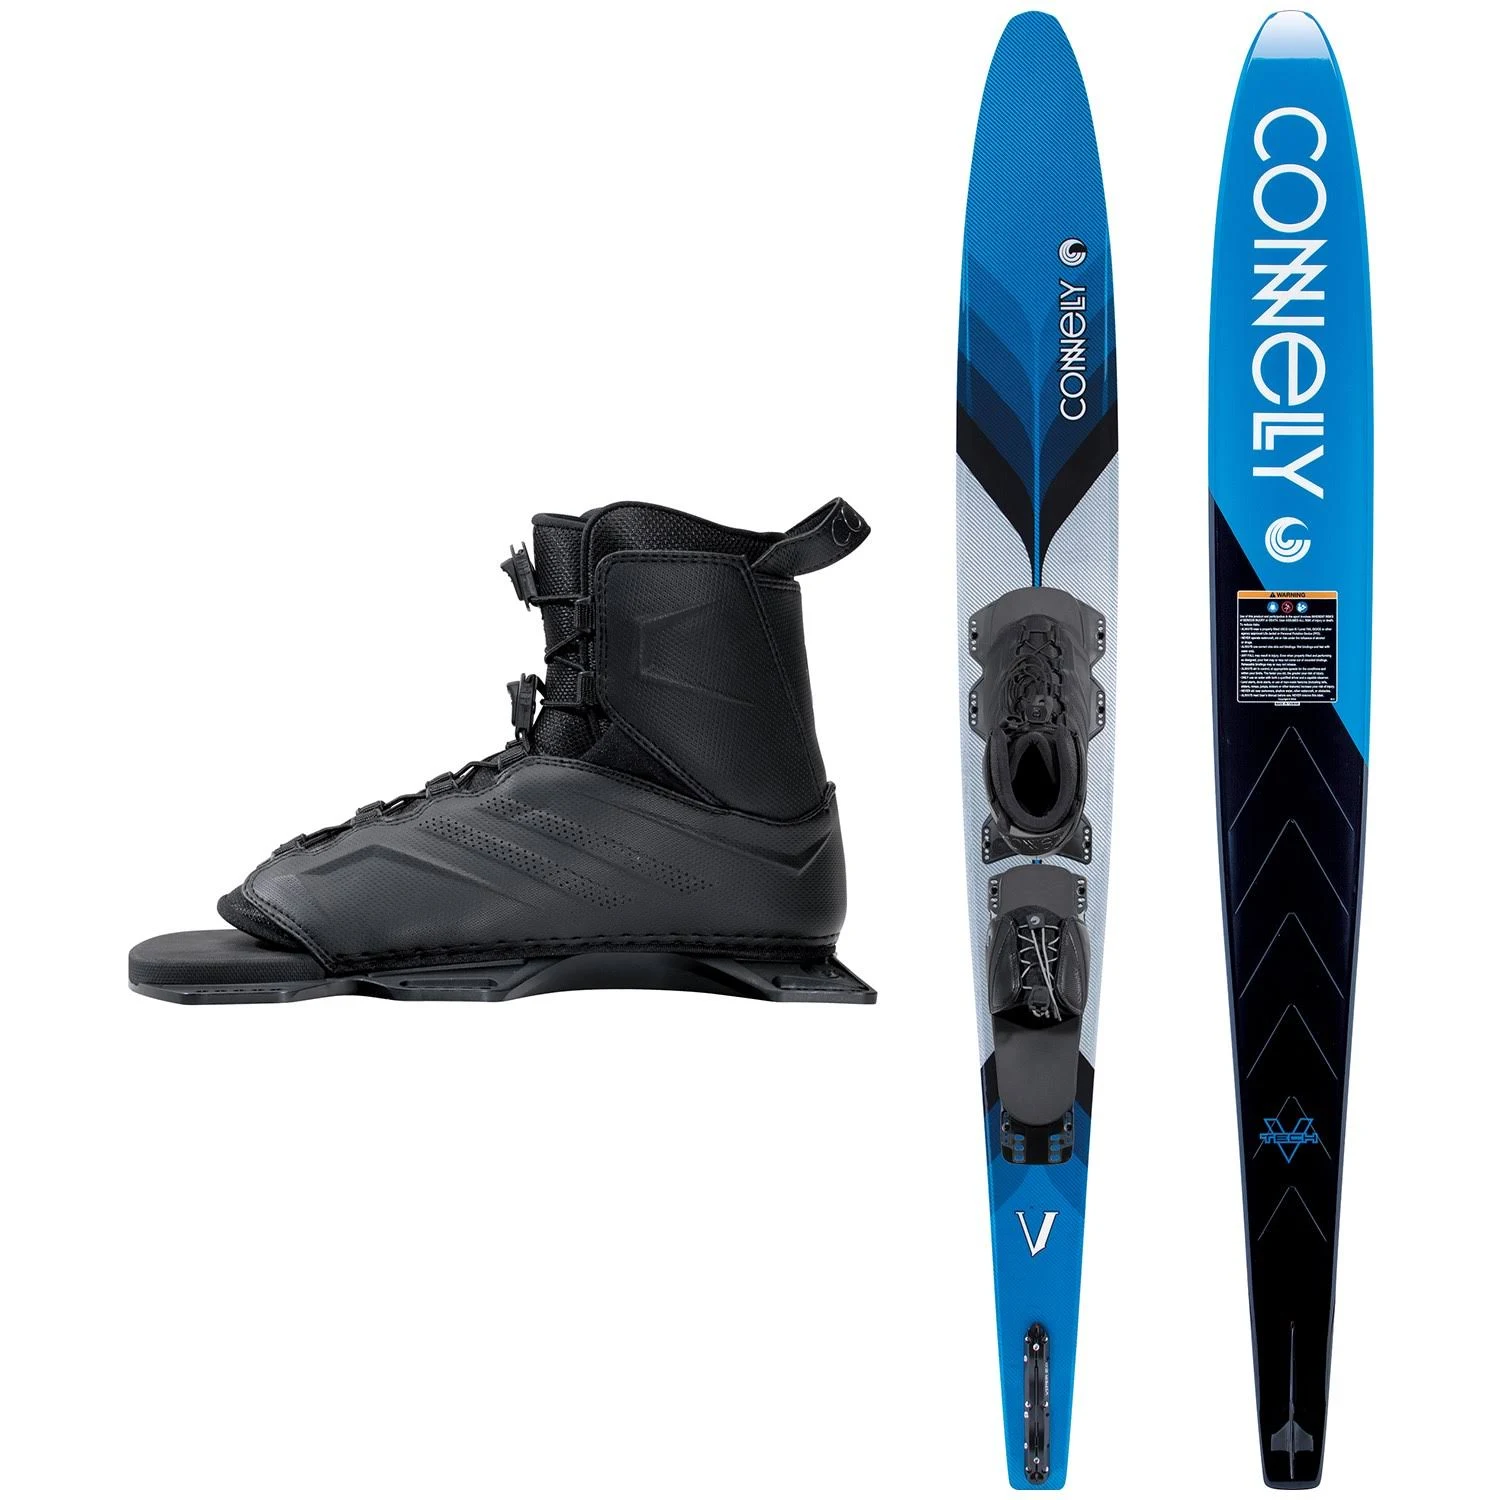 Connelly V Slalom Waterski with Tempest Binding and Rear Toe Plate